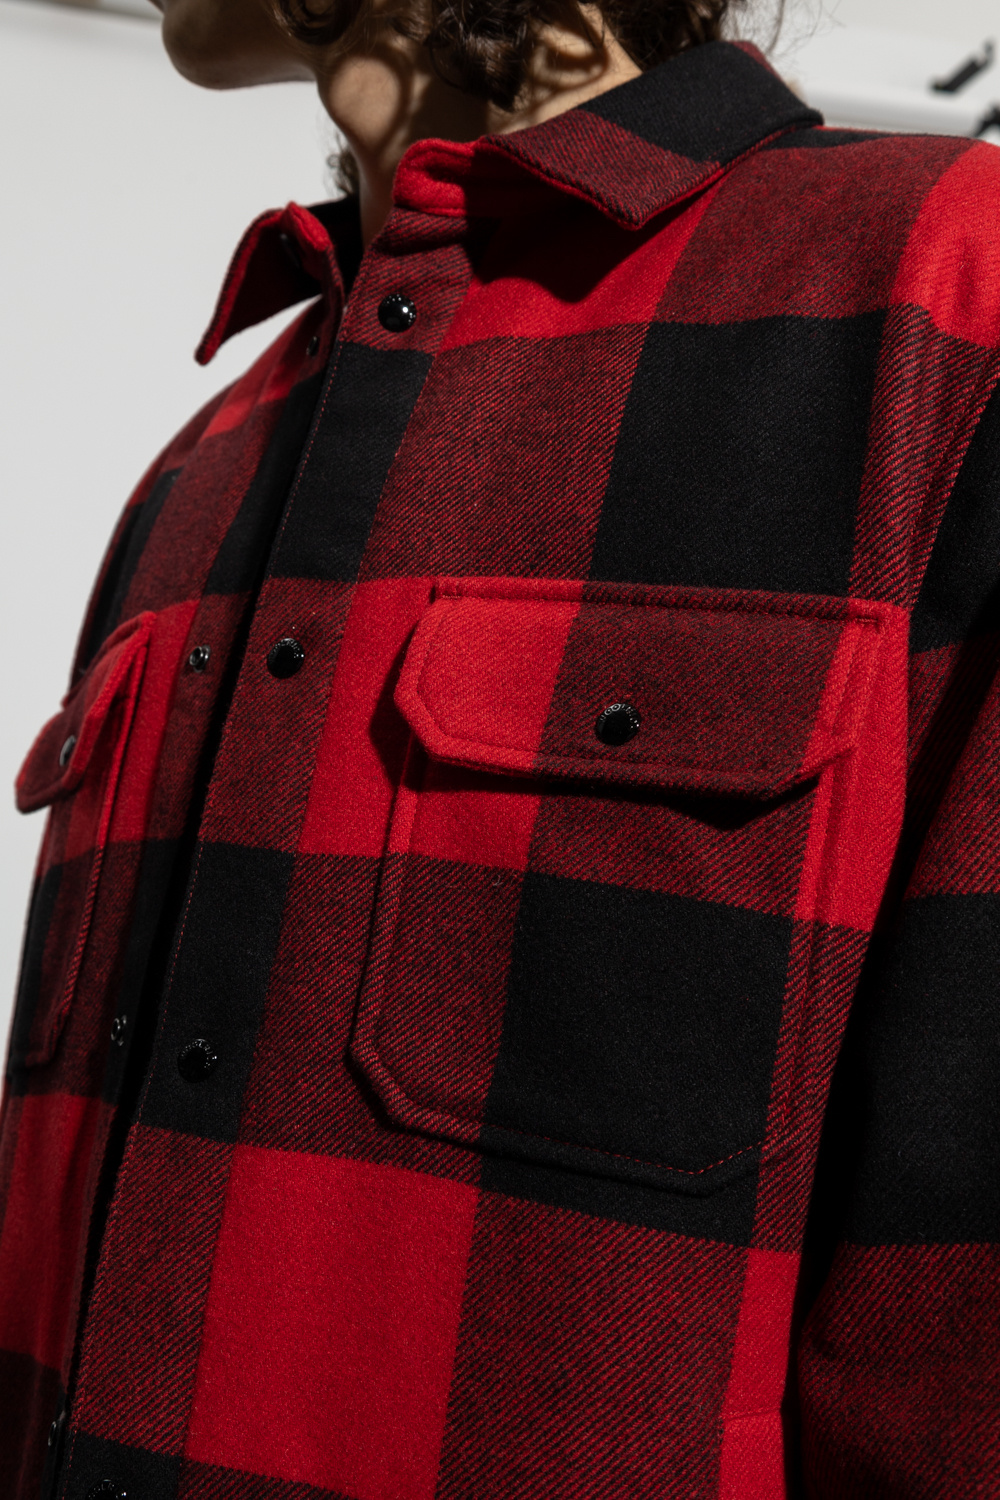 Woolrich Checked puffer intime jacket